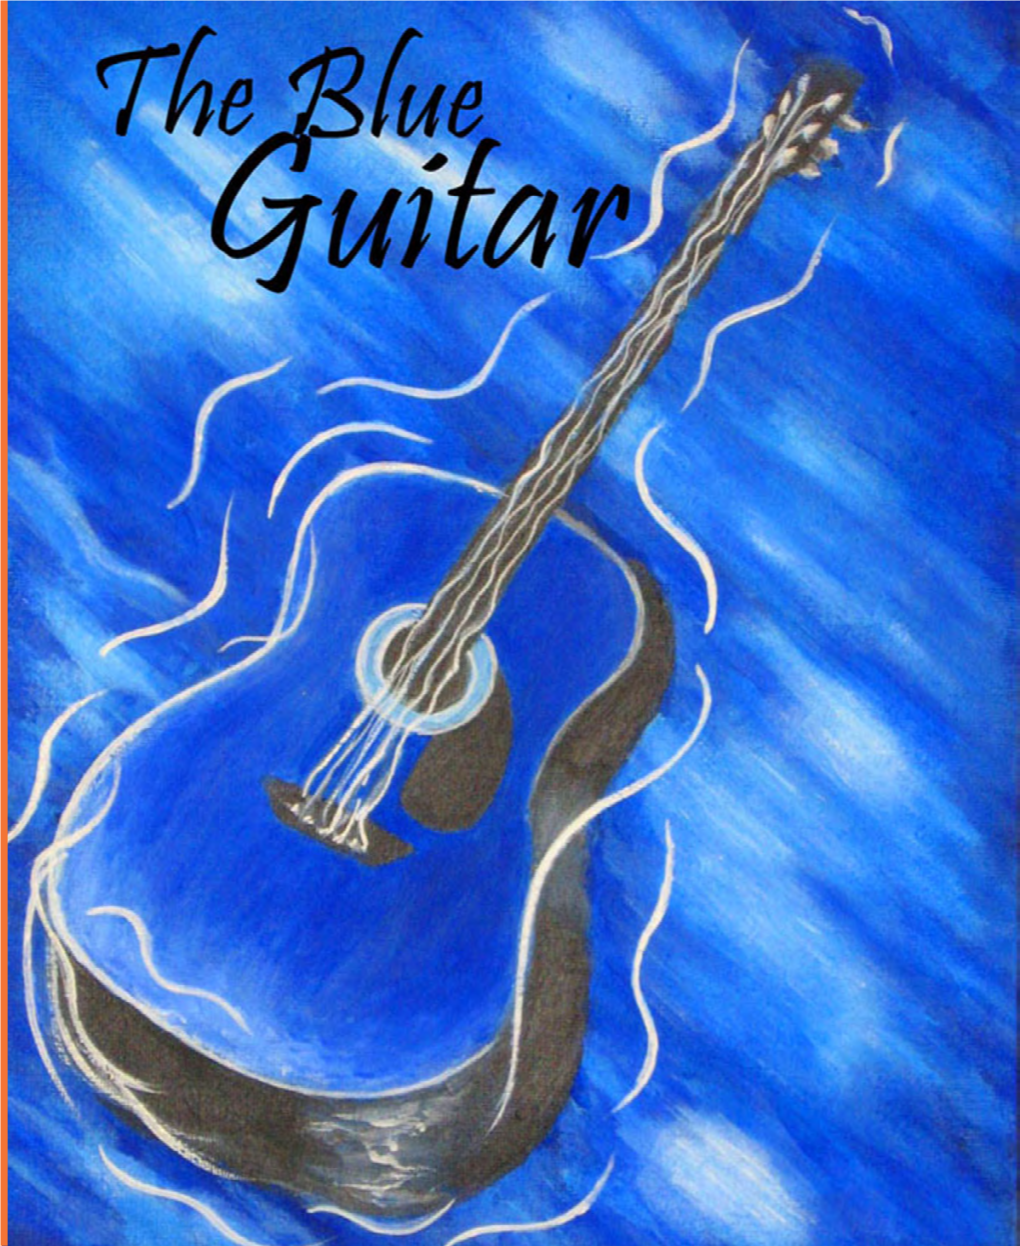 75 a Call to Writers for the Blue Guitar